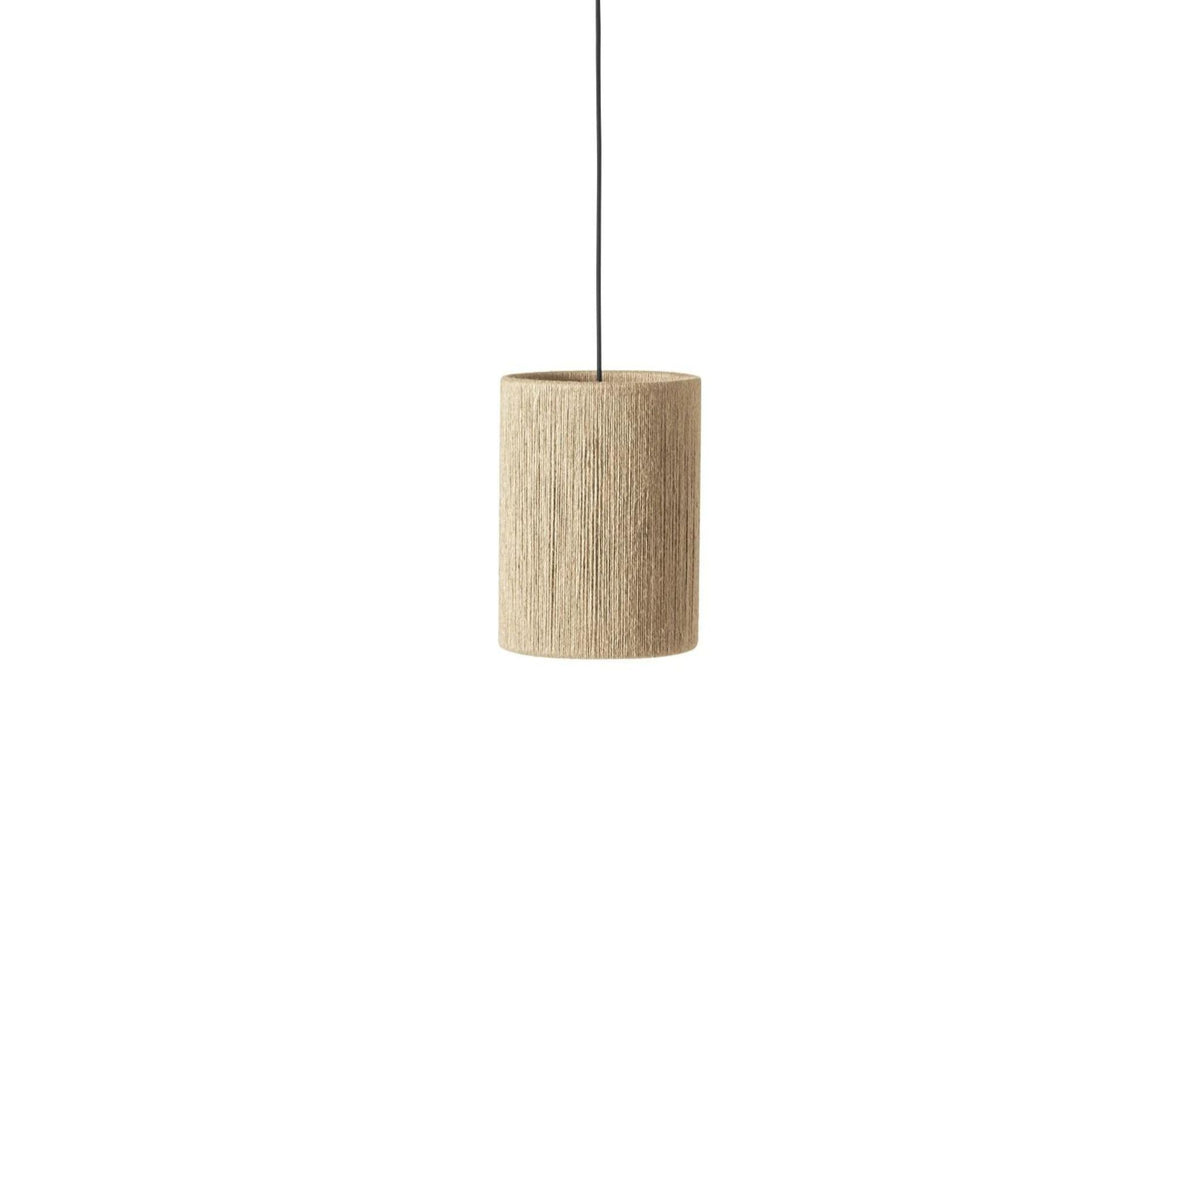 Made by Hand RO Low Pendant Lamp 23 by Kim Richardt